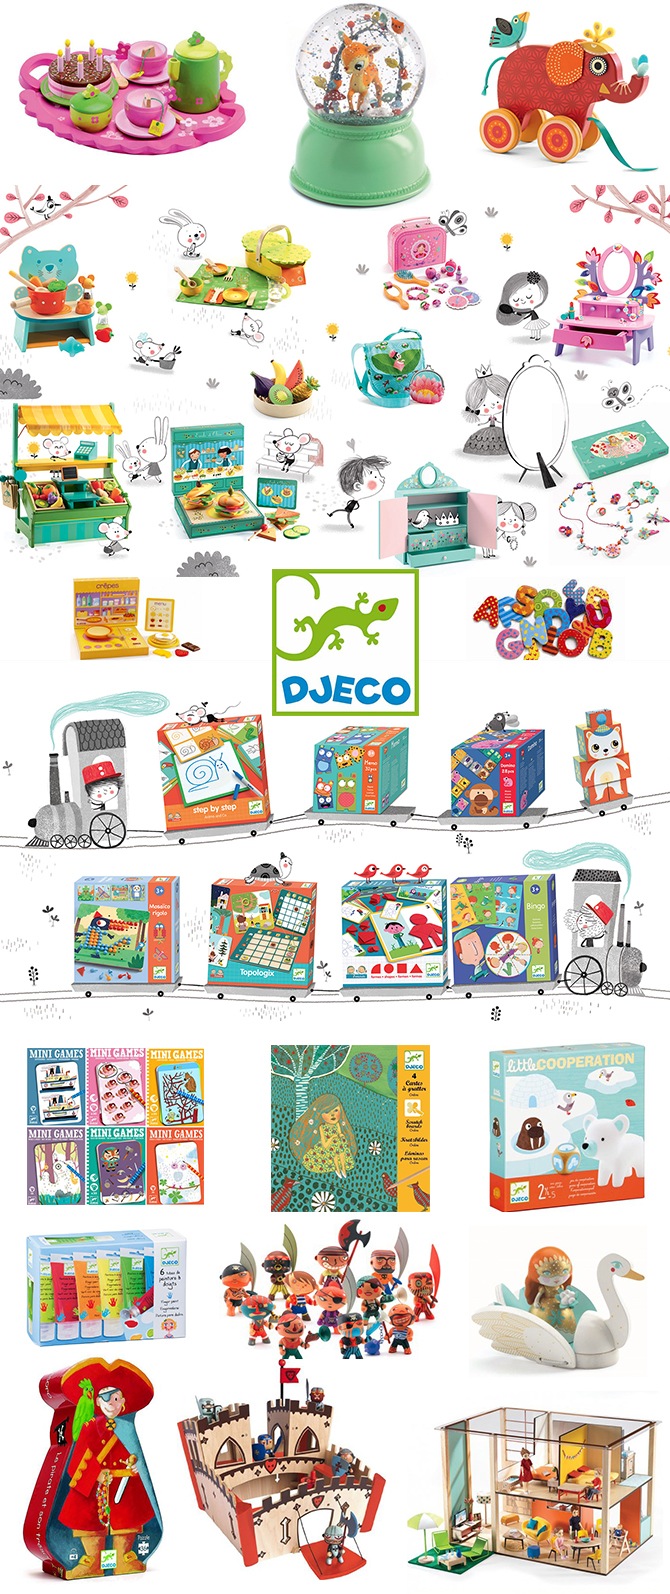 DJECO_Selection-Jouets-60-ans